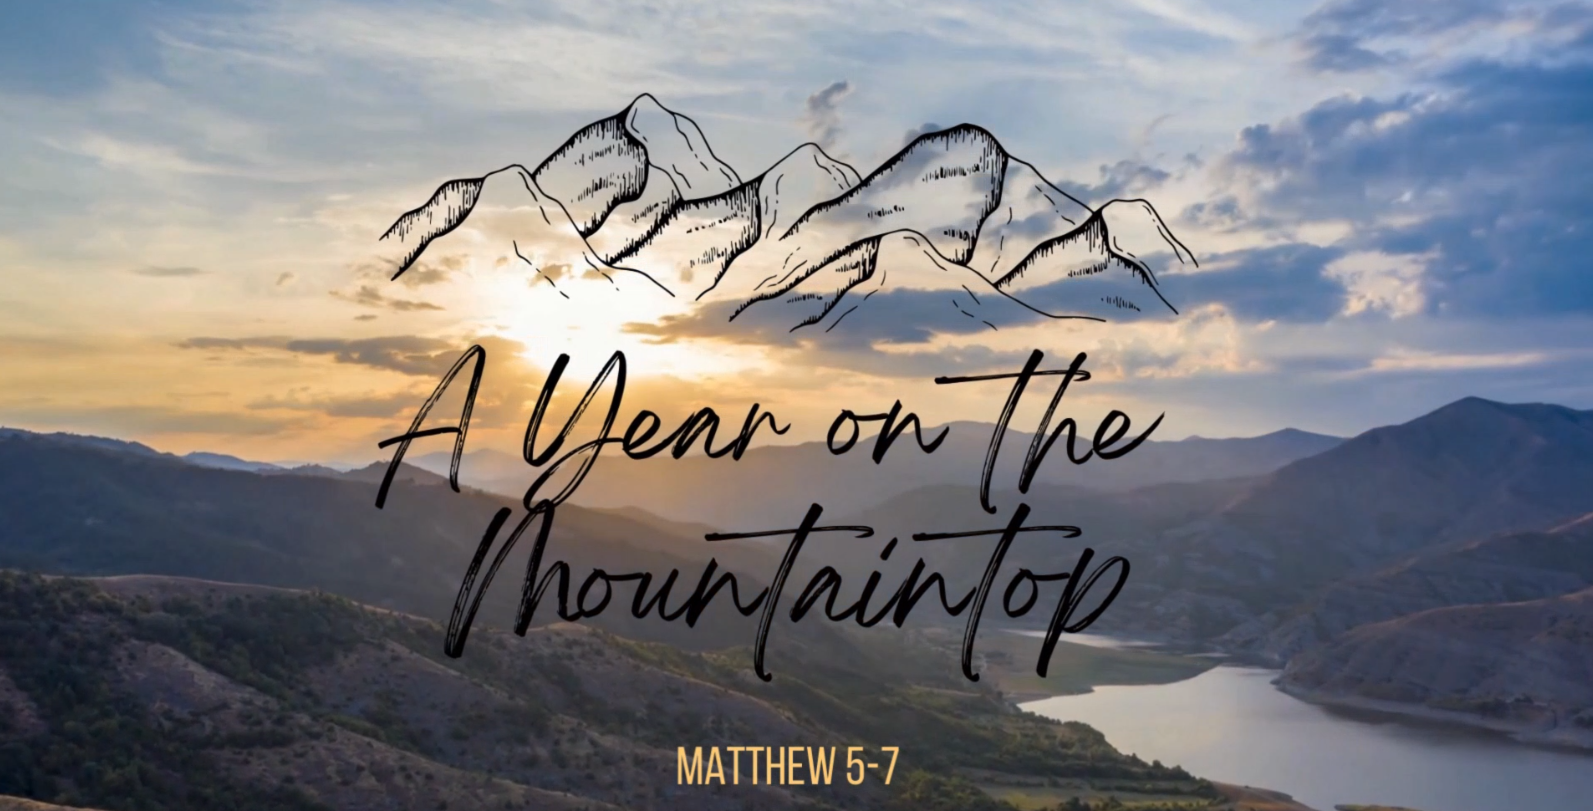 Year on the Mountaintop